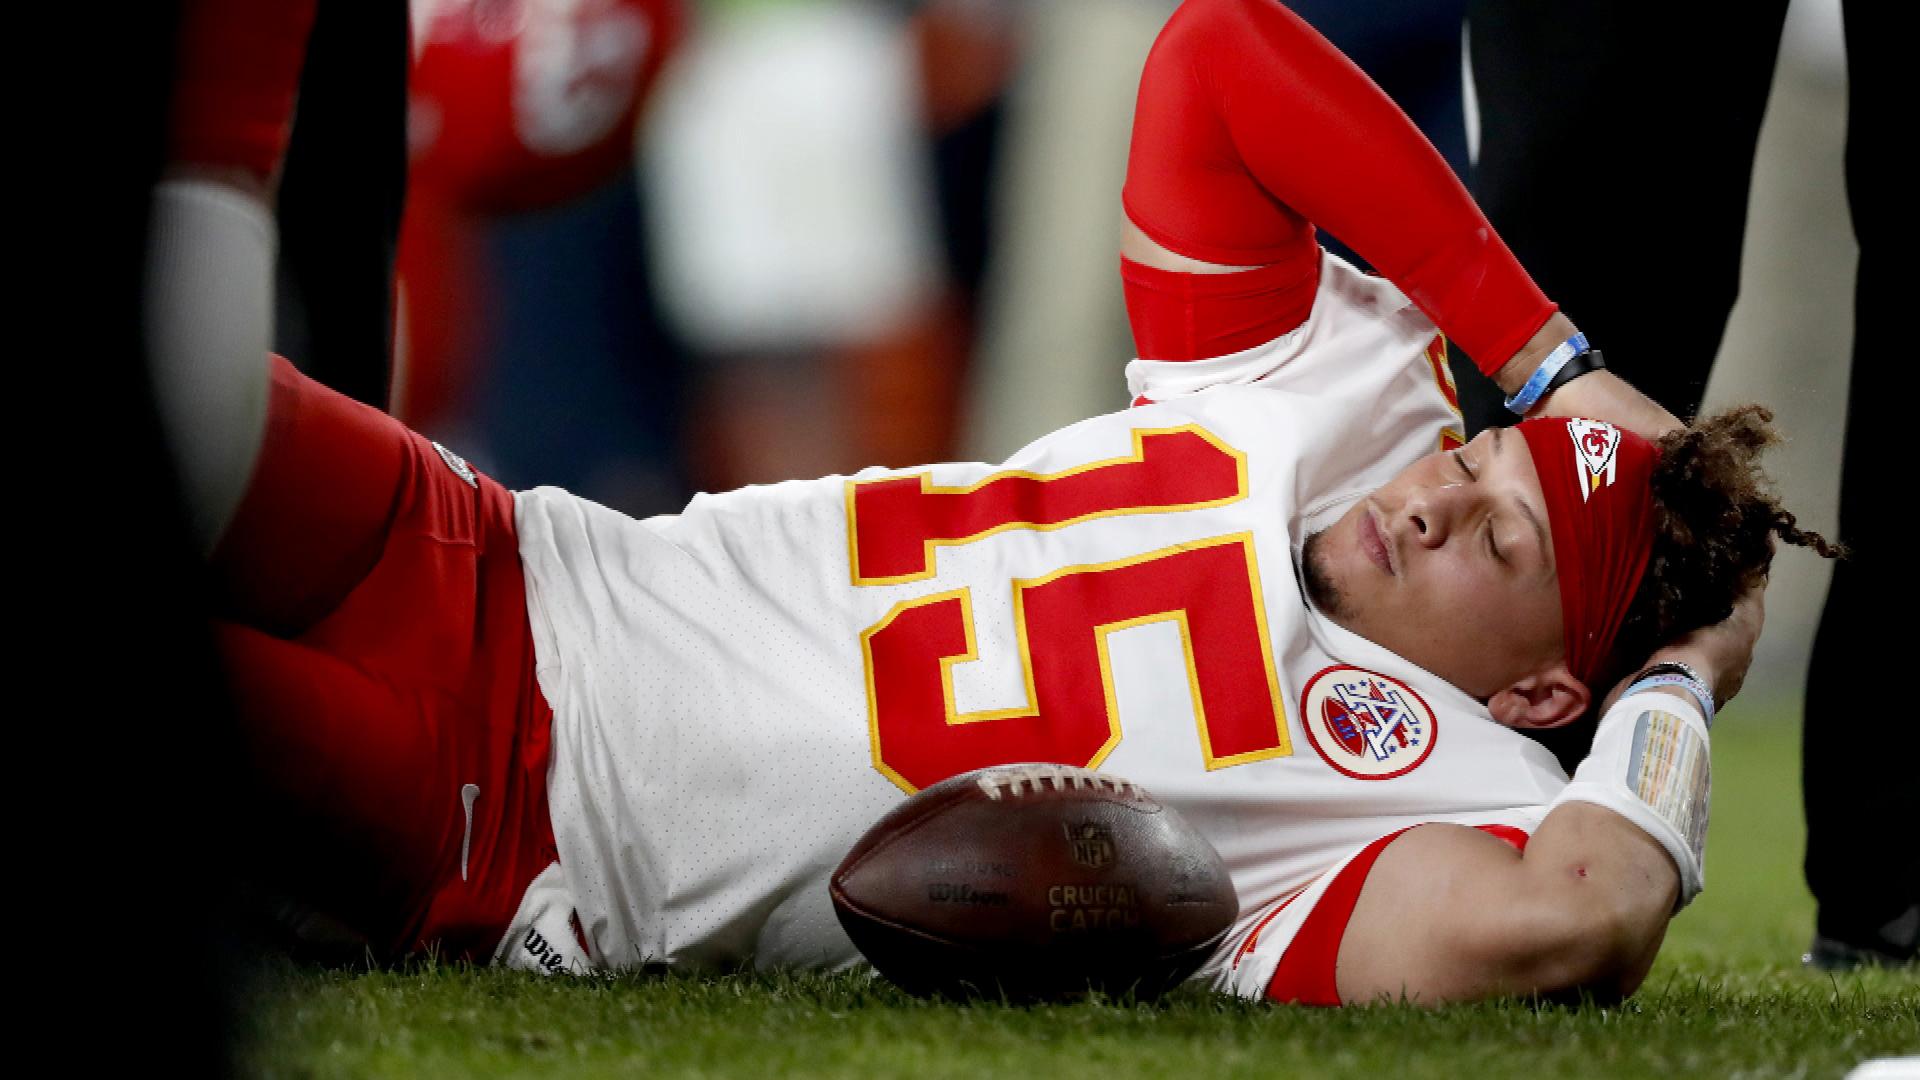 Flipboard: Why Patrick Mahomes' injury does not sink Chiefs' Hill and Kelce